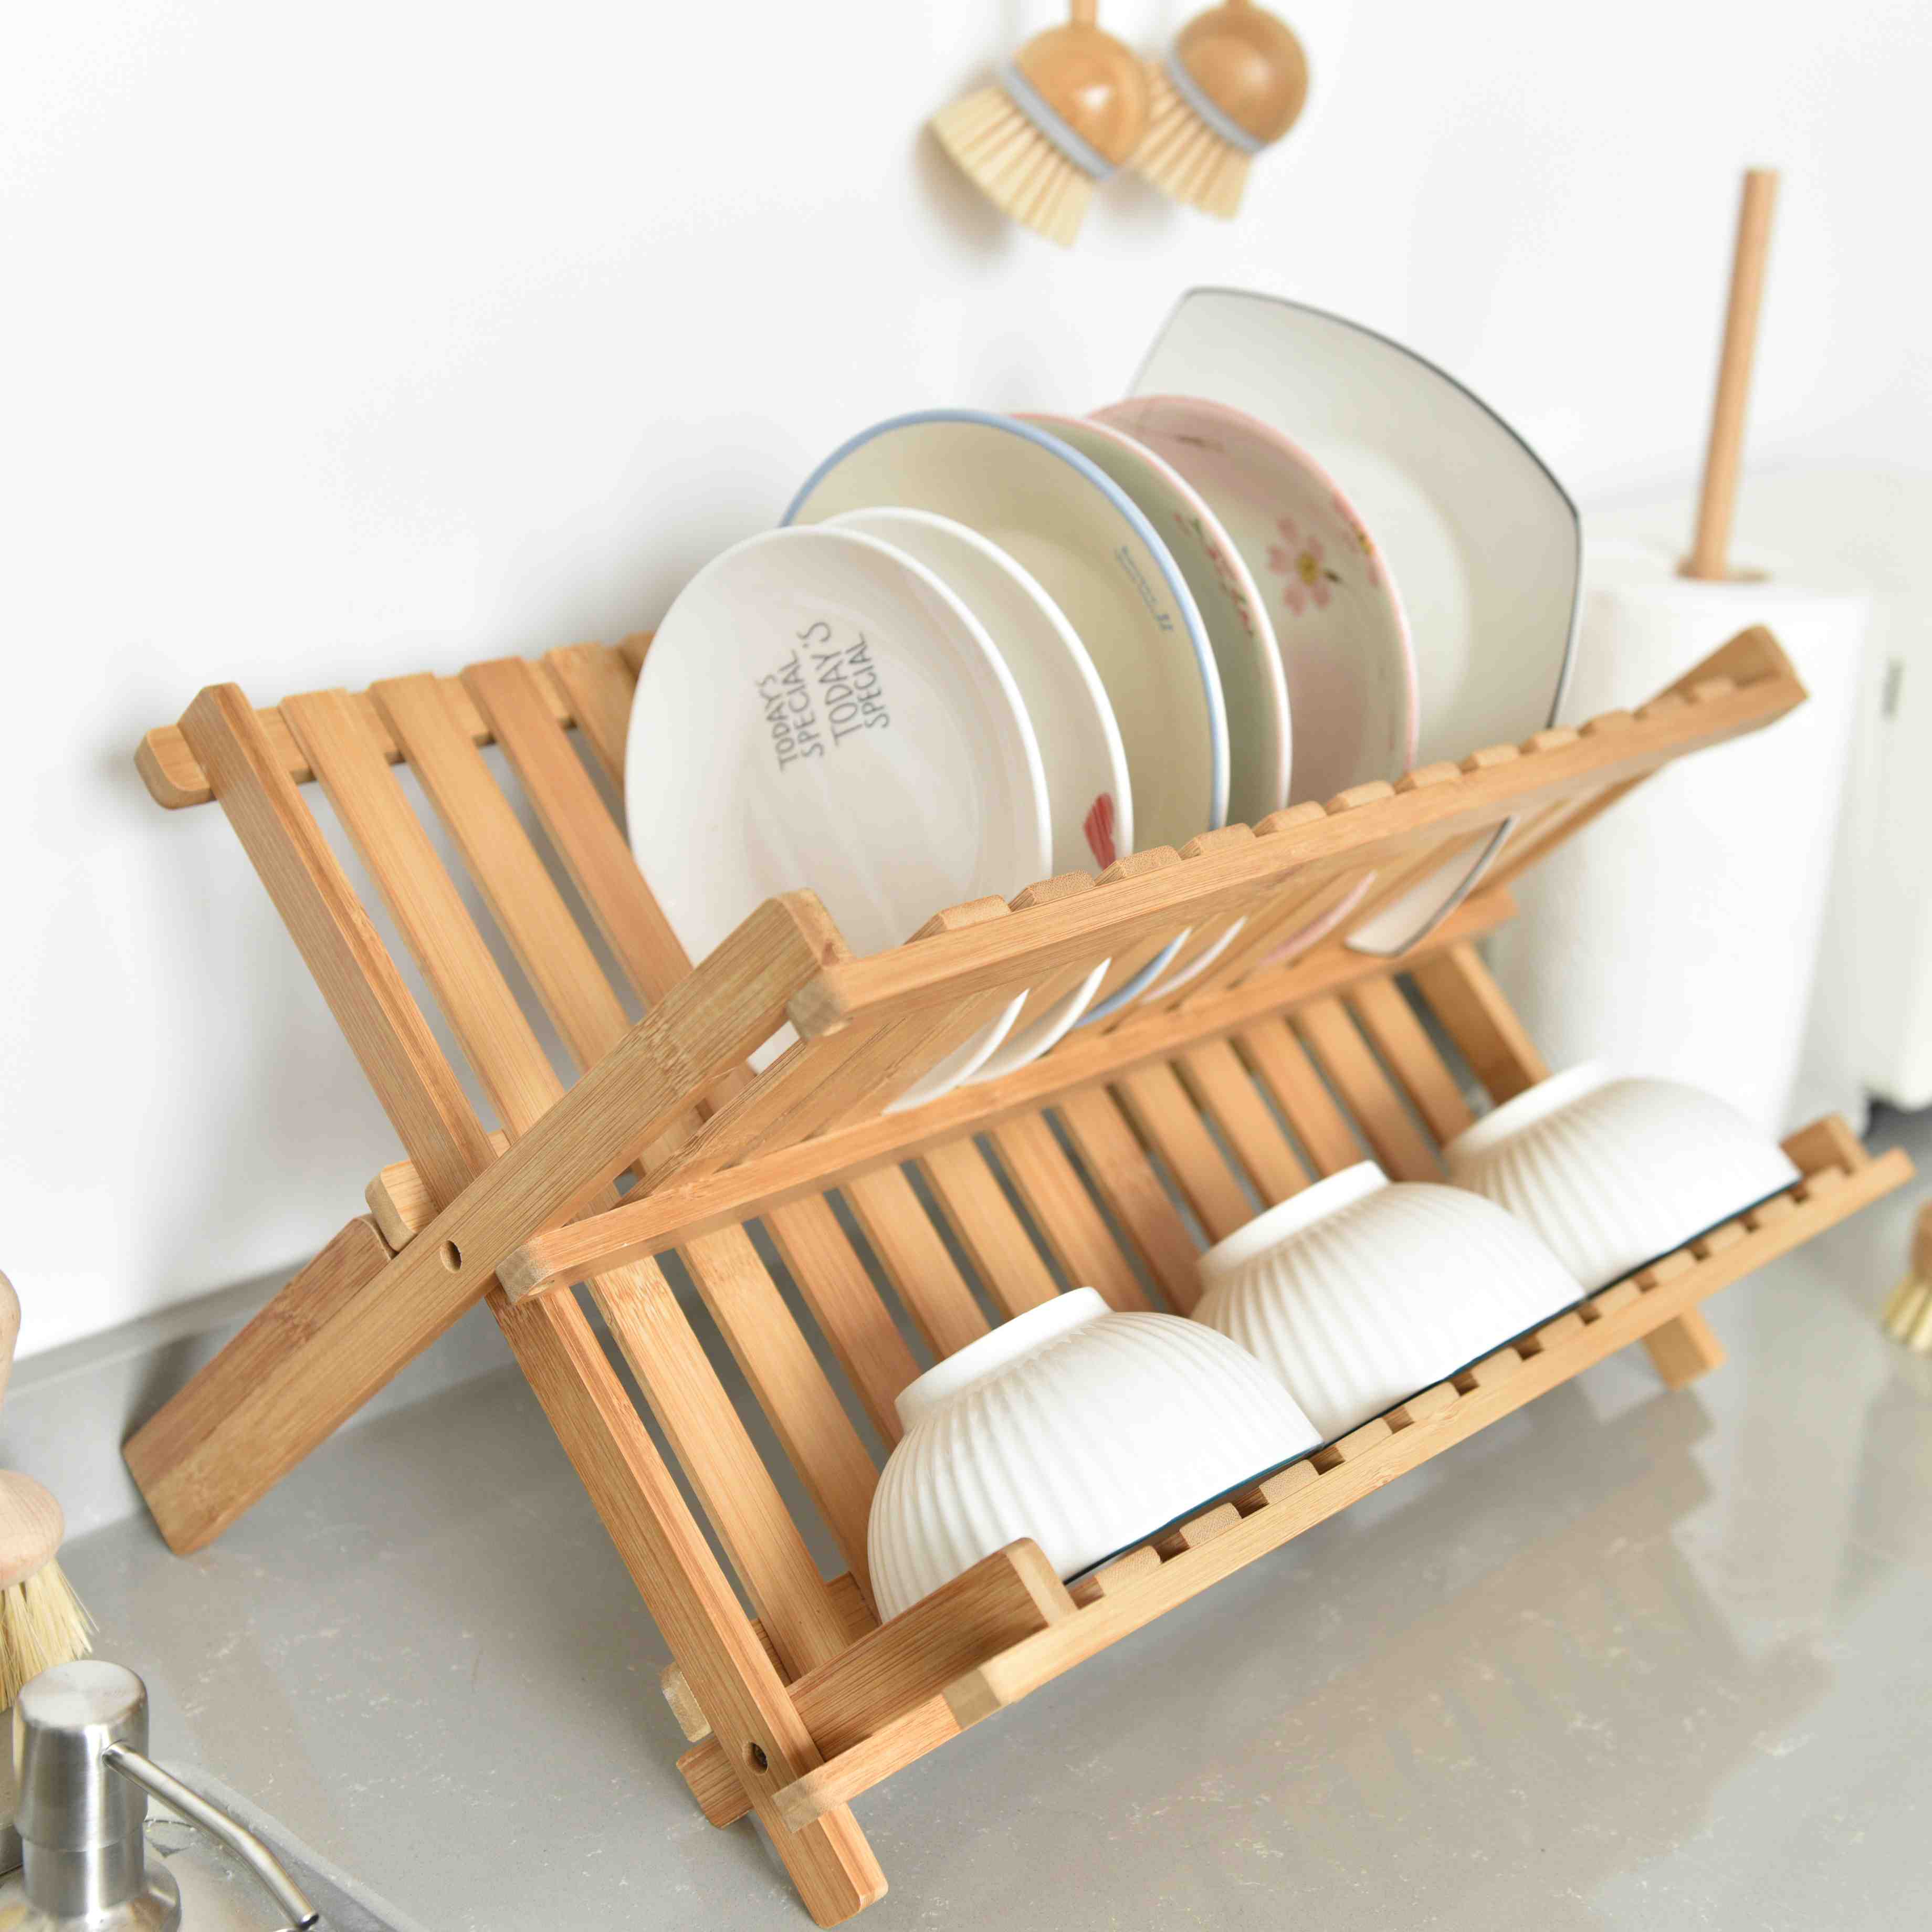 Collapsible Dish Drying Rack 